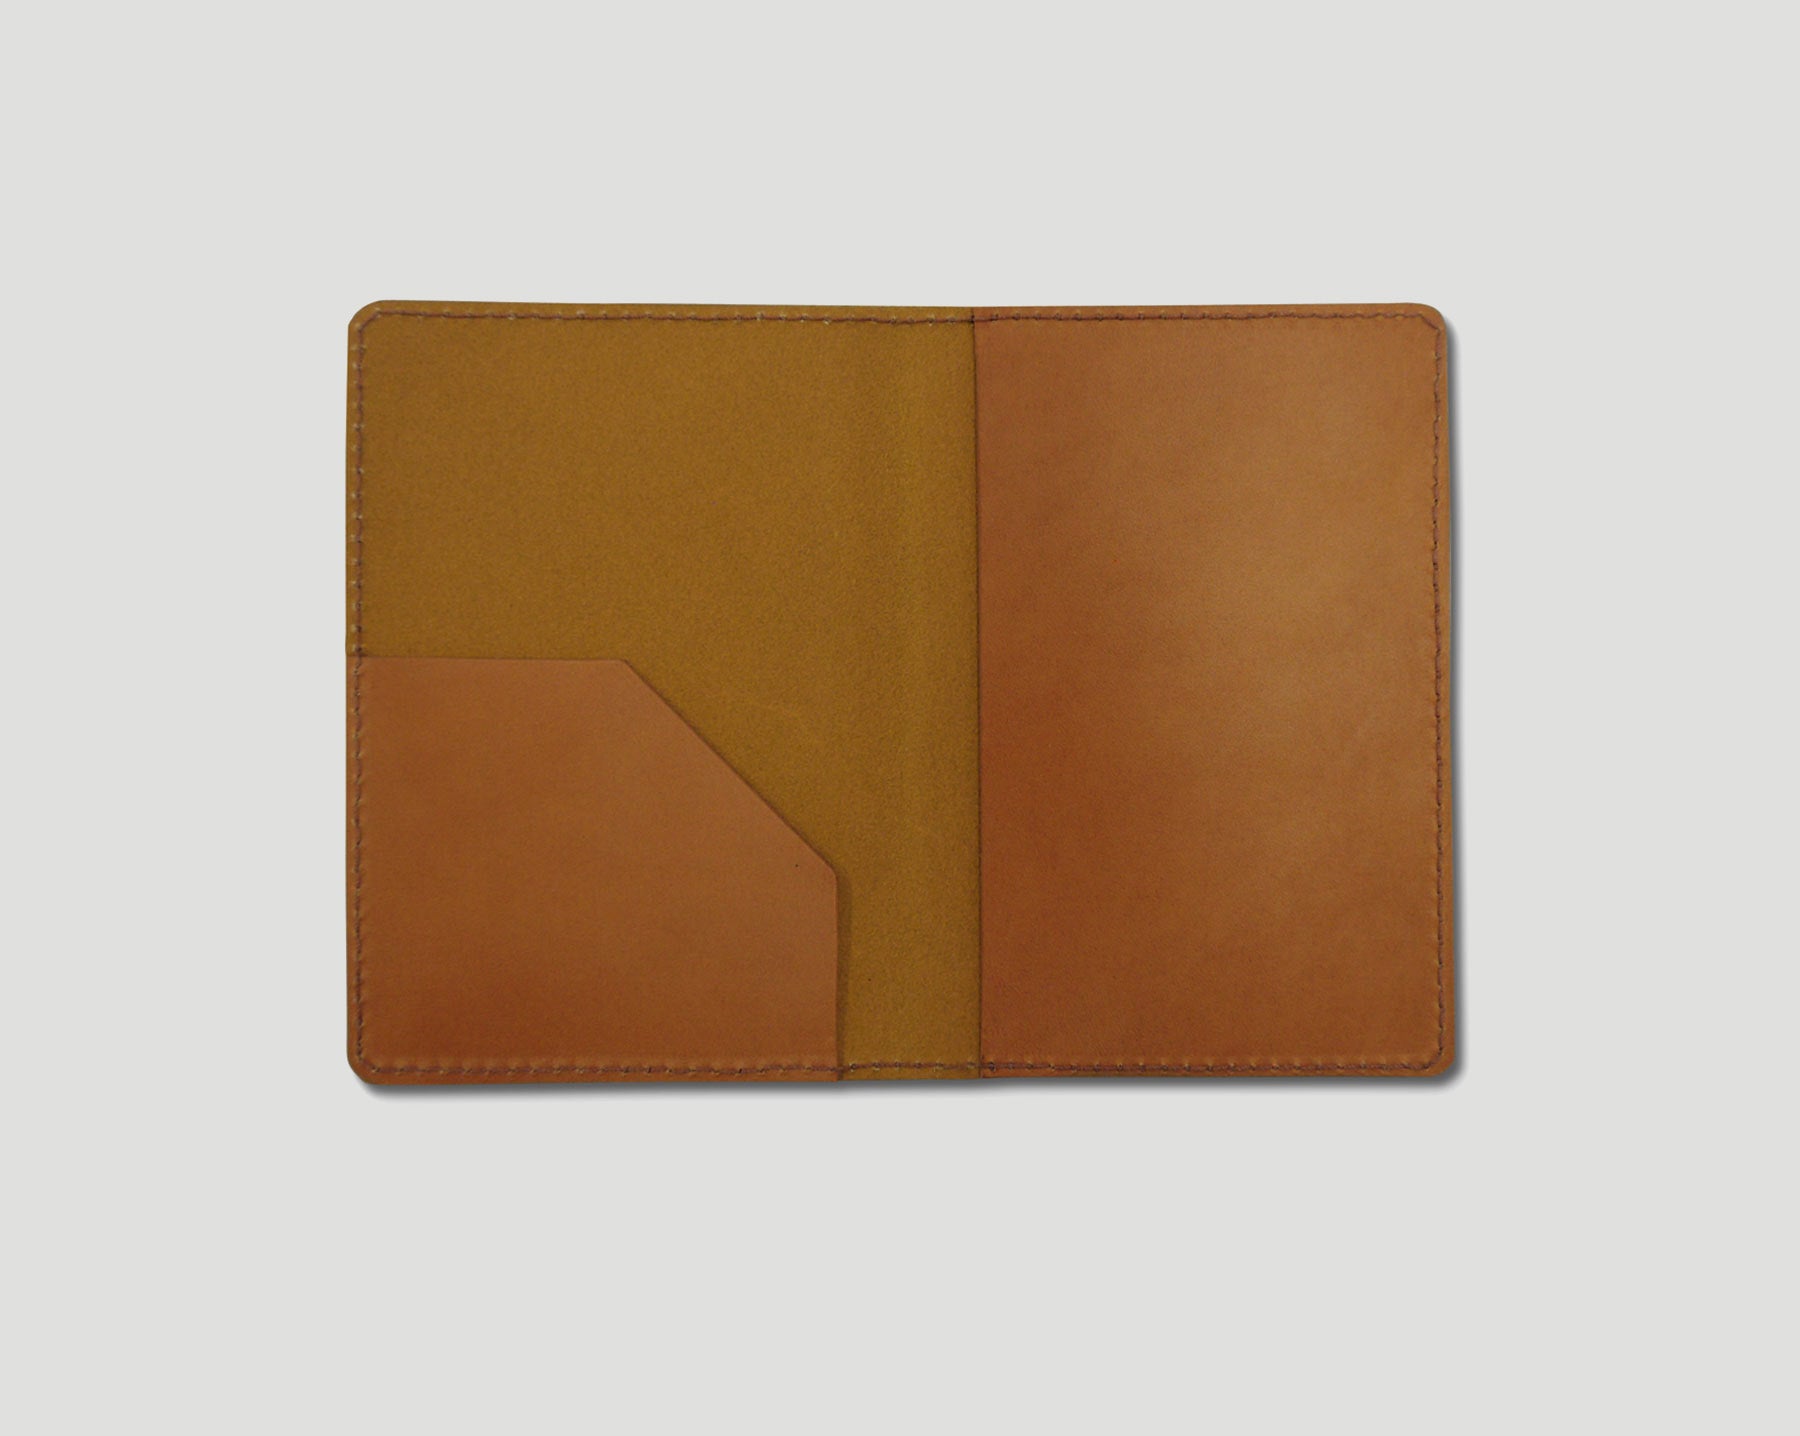 Yellow Passport holder, Vegetable tanned Leather Passport Cover, Passport  wallet PC005